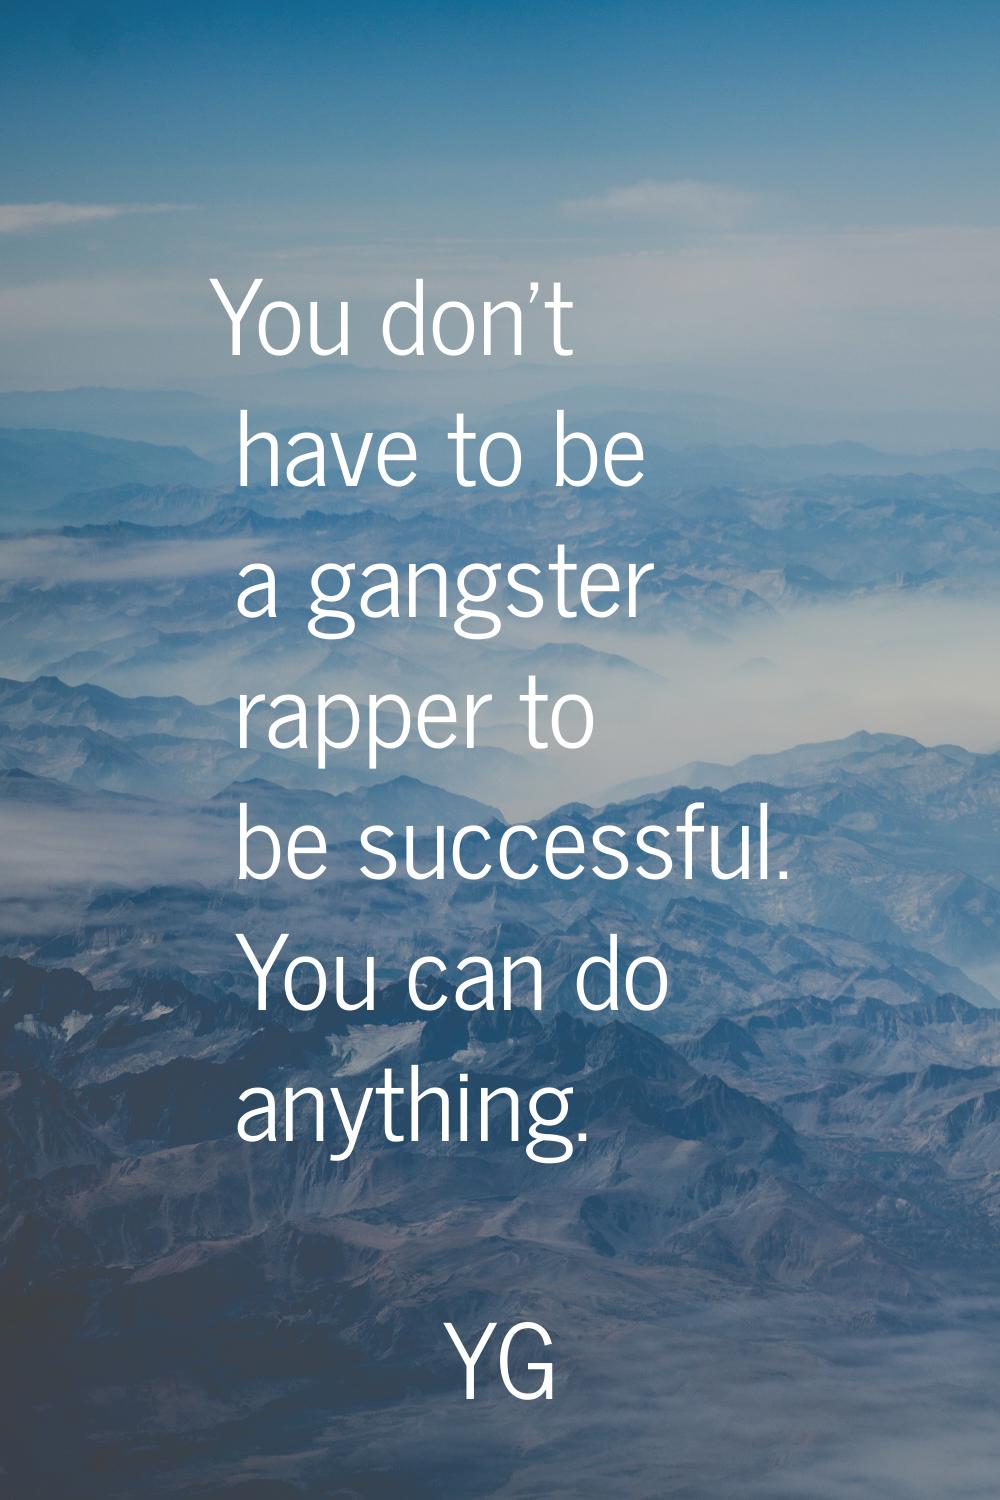 You don't have to be a gangster rapper to be successful. You can do anything.